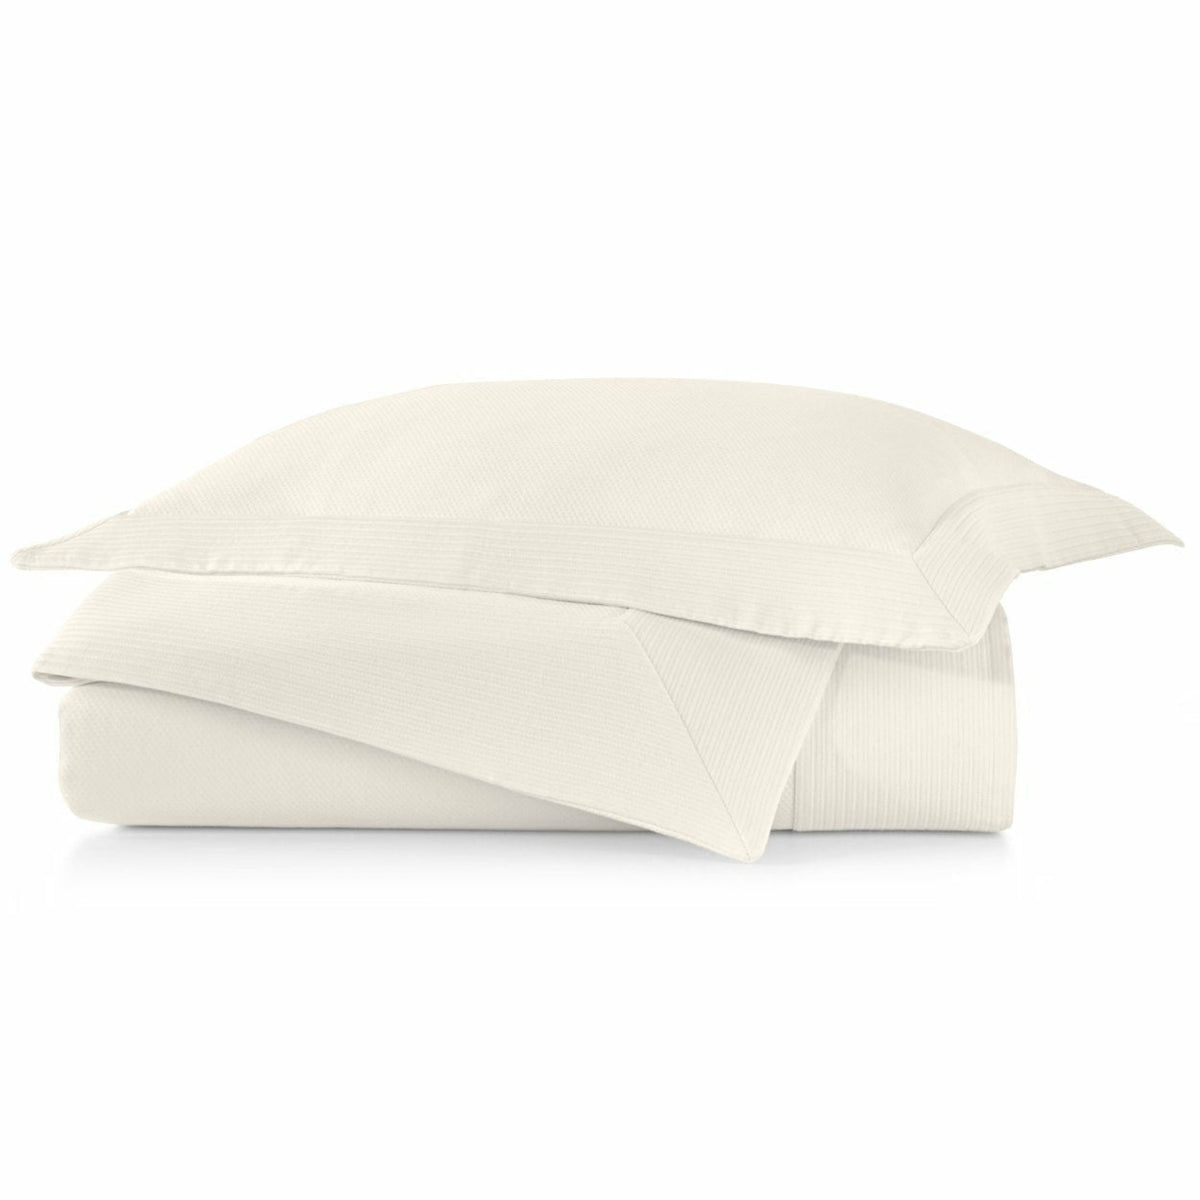 Peacock Alley Angelina Matelasse Bedding Pearl Fine Linens